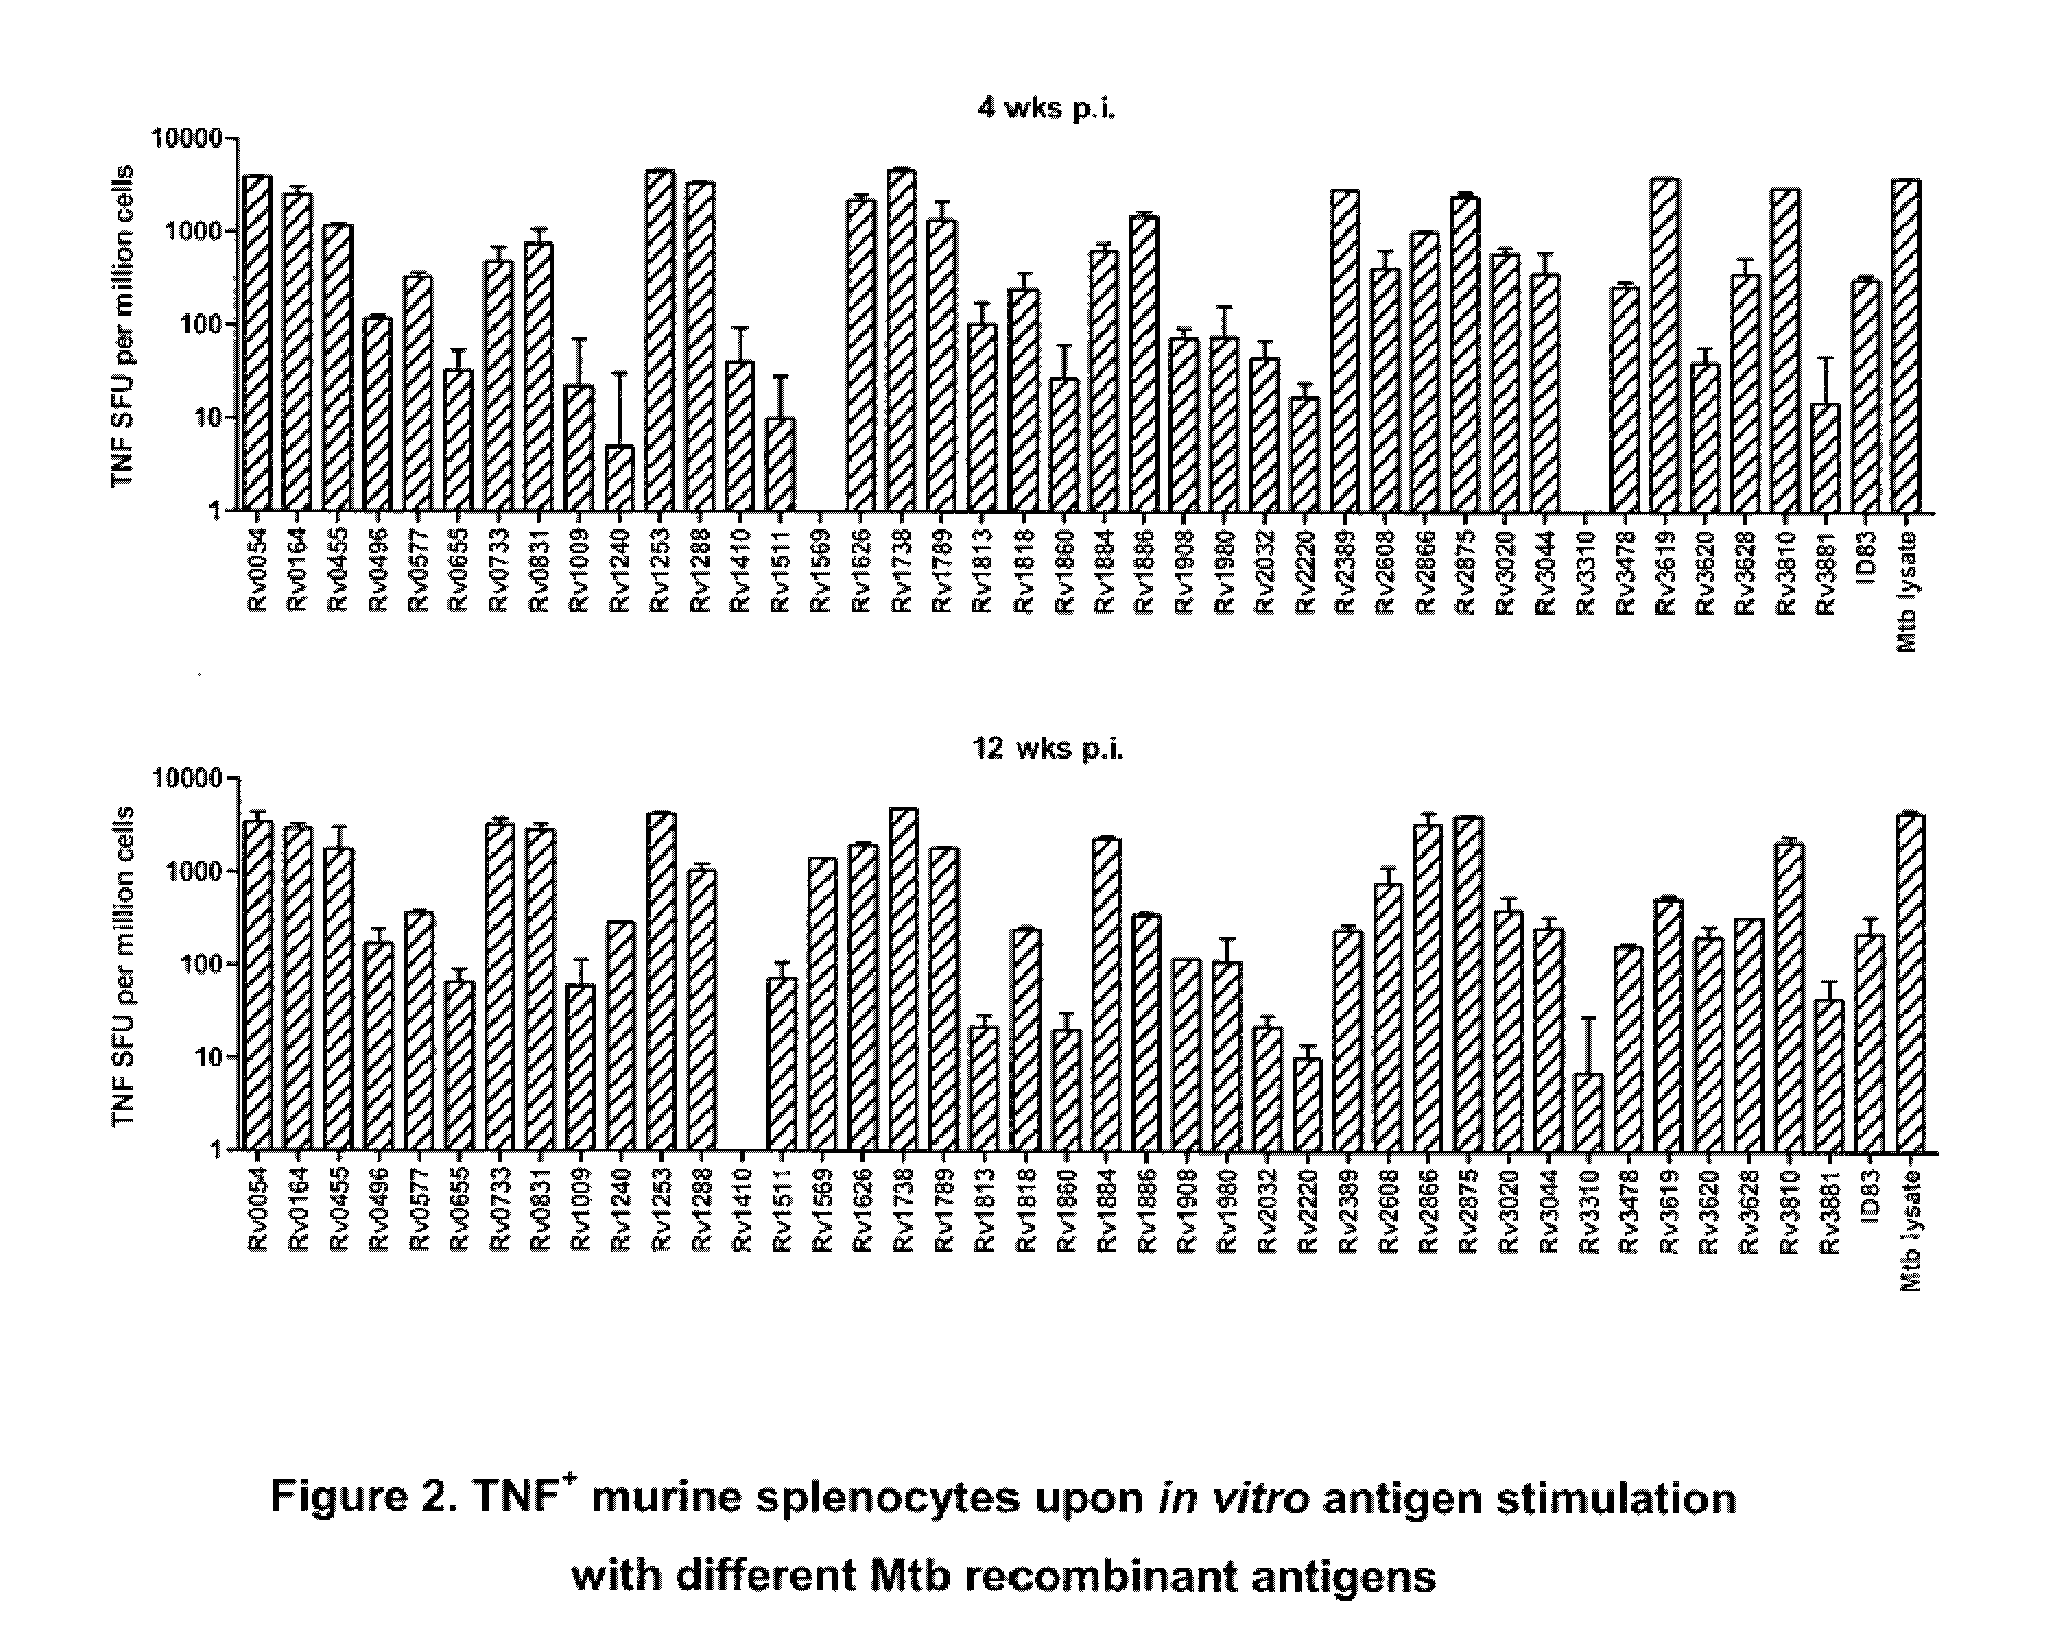 Immunogenic compositions comprising <i>Mycobacterium tuberculosis </i>polypeptides and fusions thereof